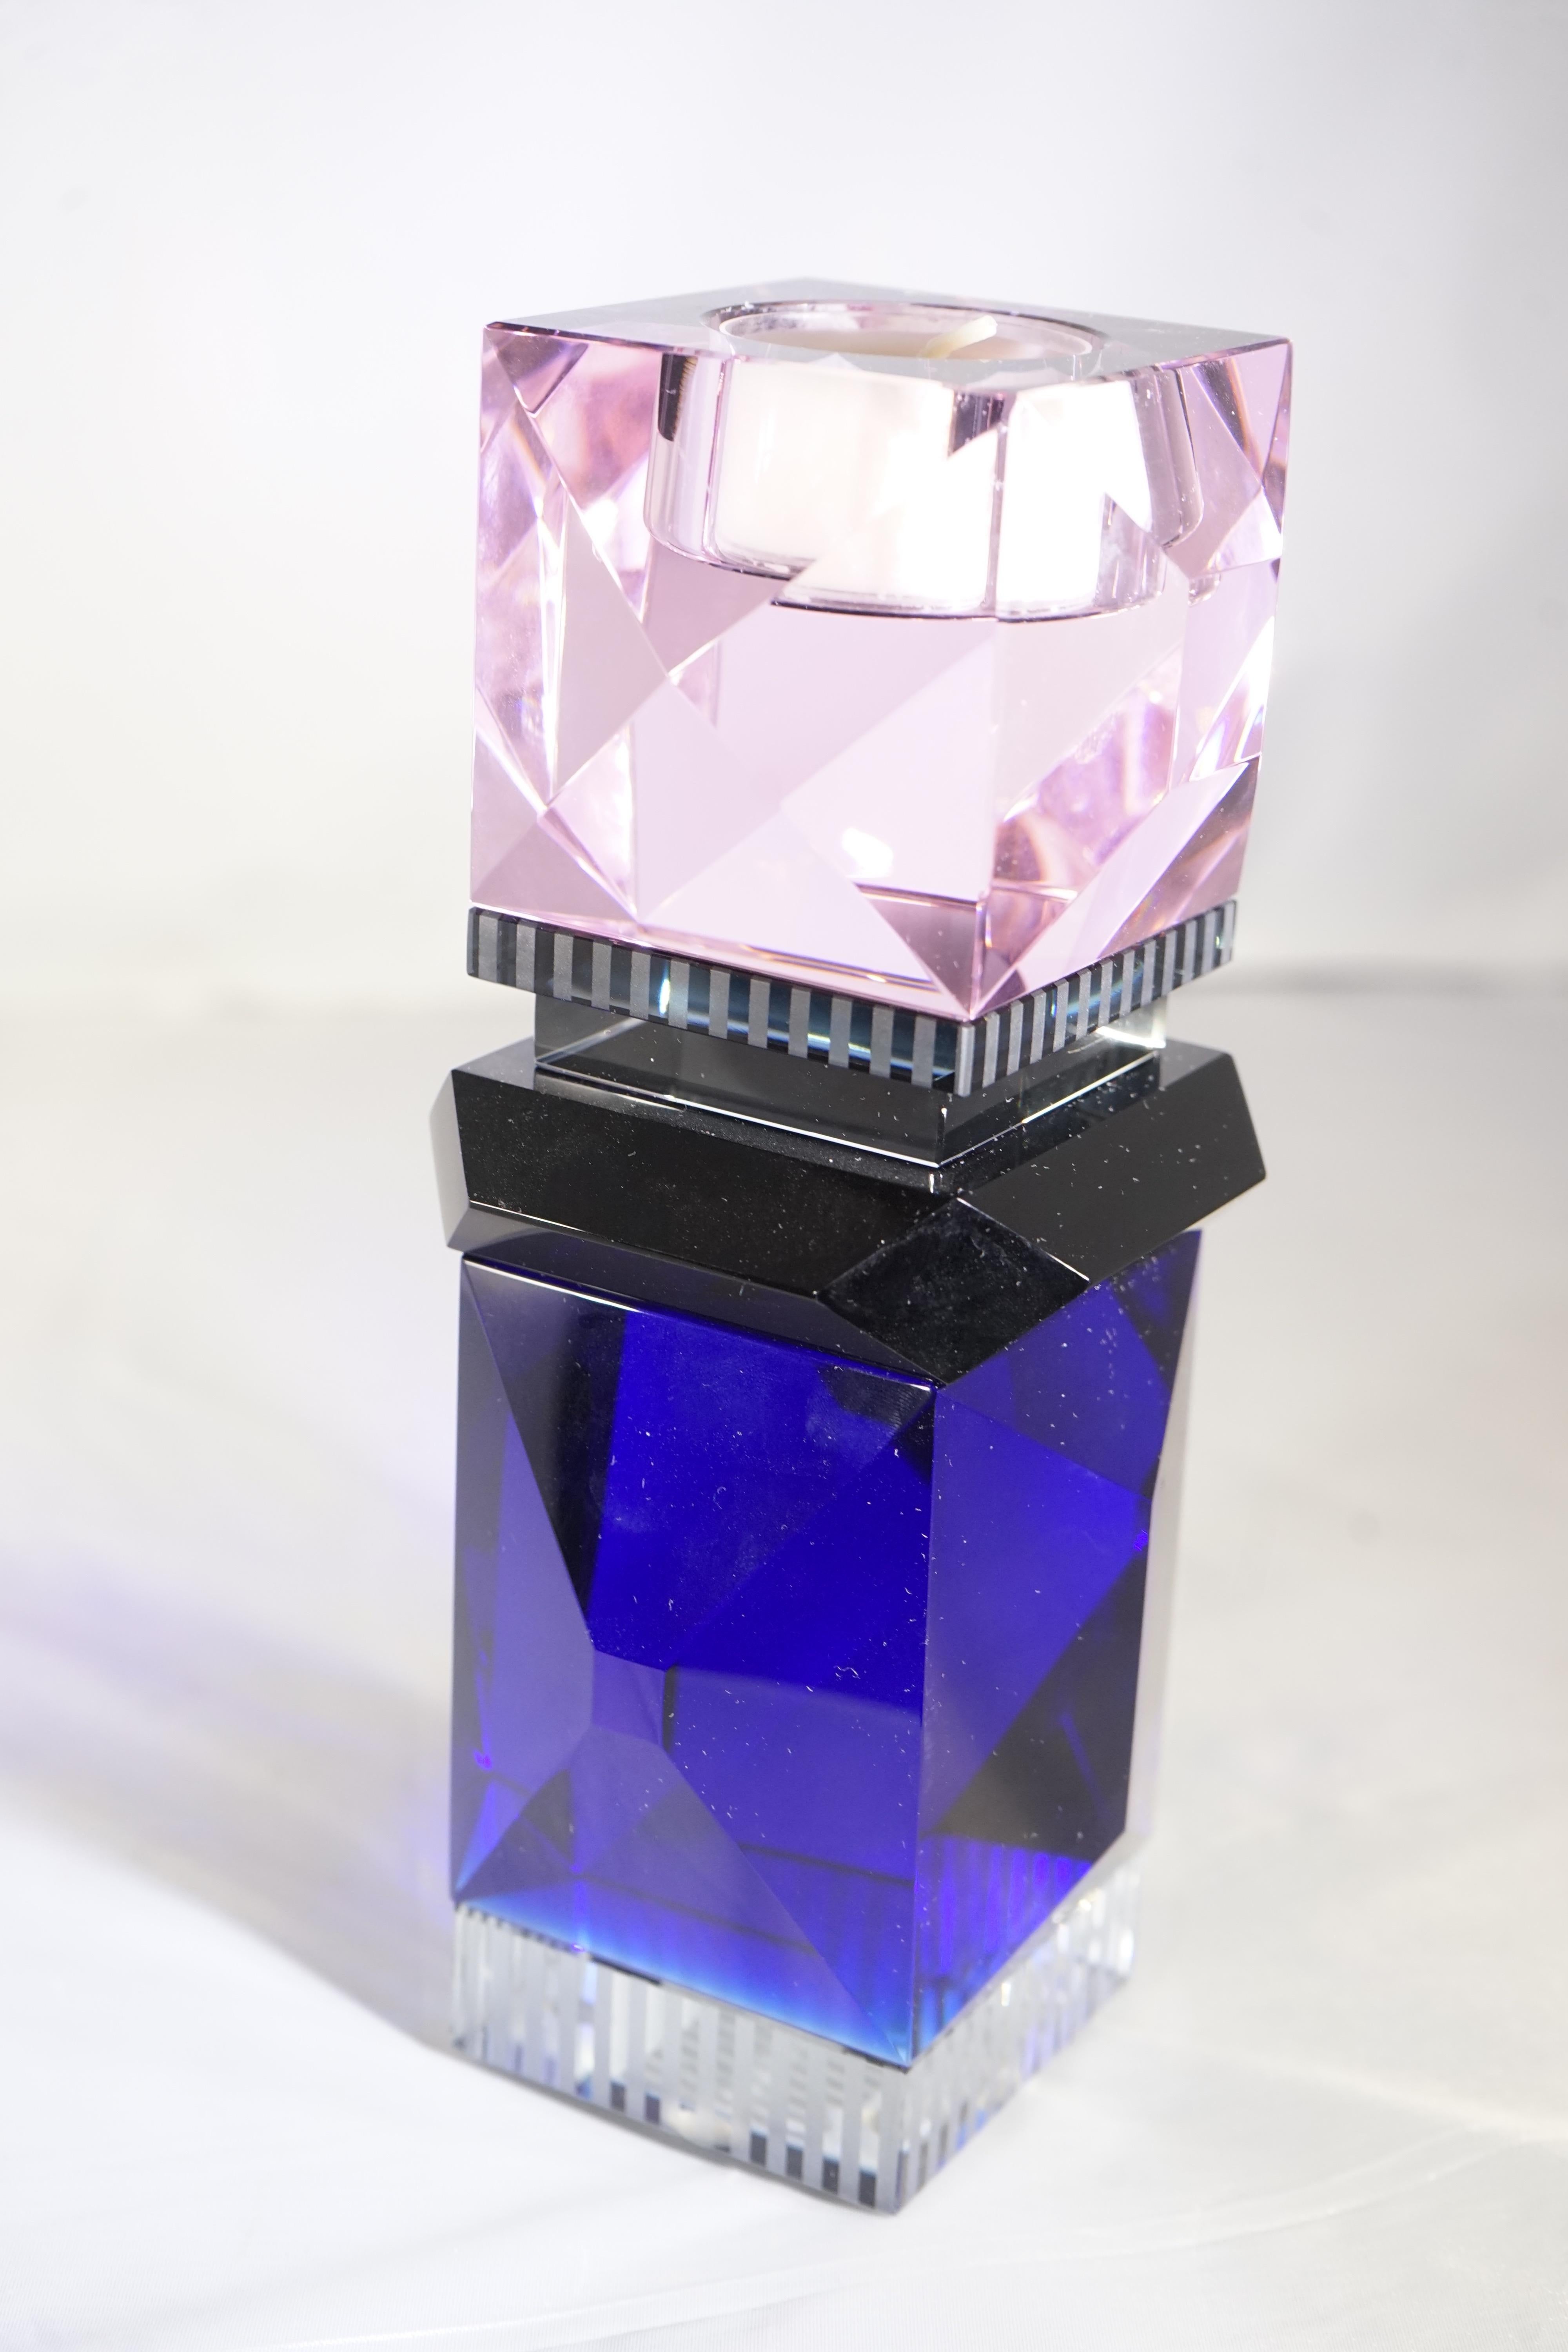 Contemporary hand-cut pink, blue, clear and black crystal Miami t-light holder (and candle).. The colourful look is inspired by the pastel-colored hotels of South Beach, Miami, and showcases signature geometric shapes and wedges.